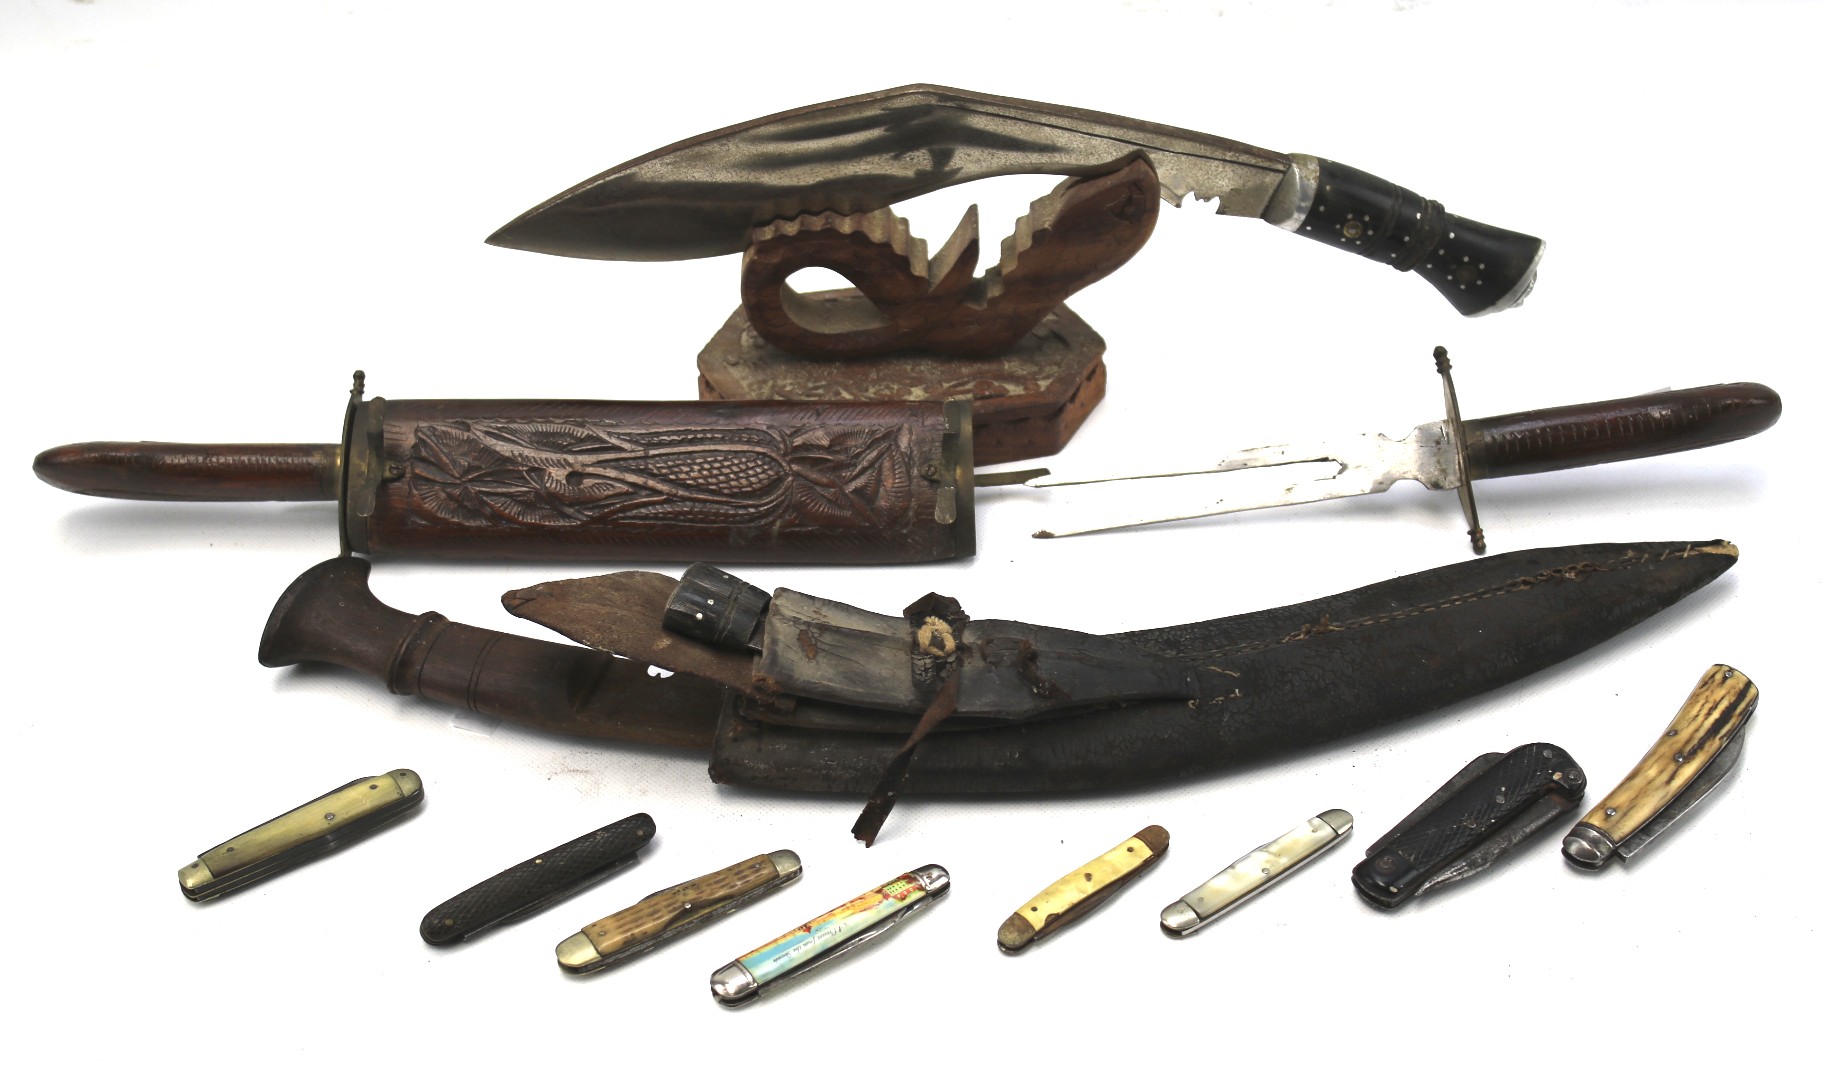 An assortment of folding knives and Middle Eastern style daggers with sheaths